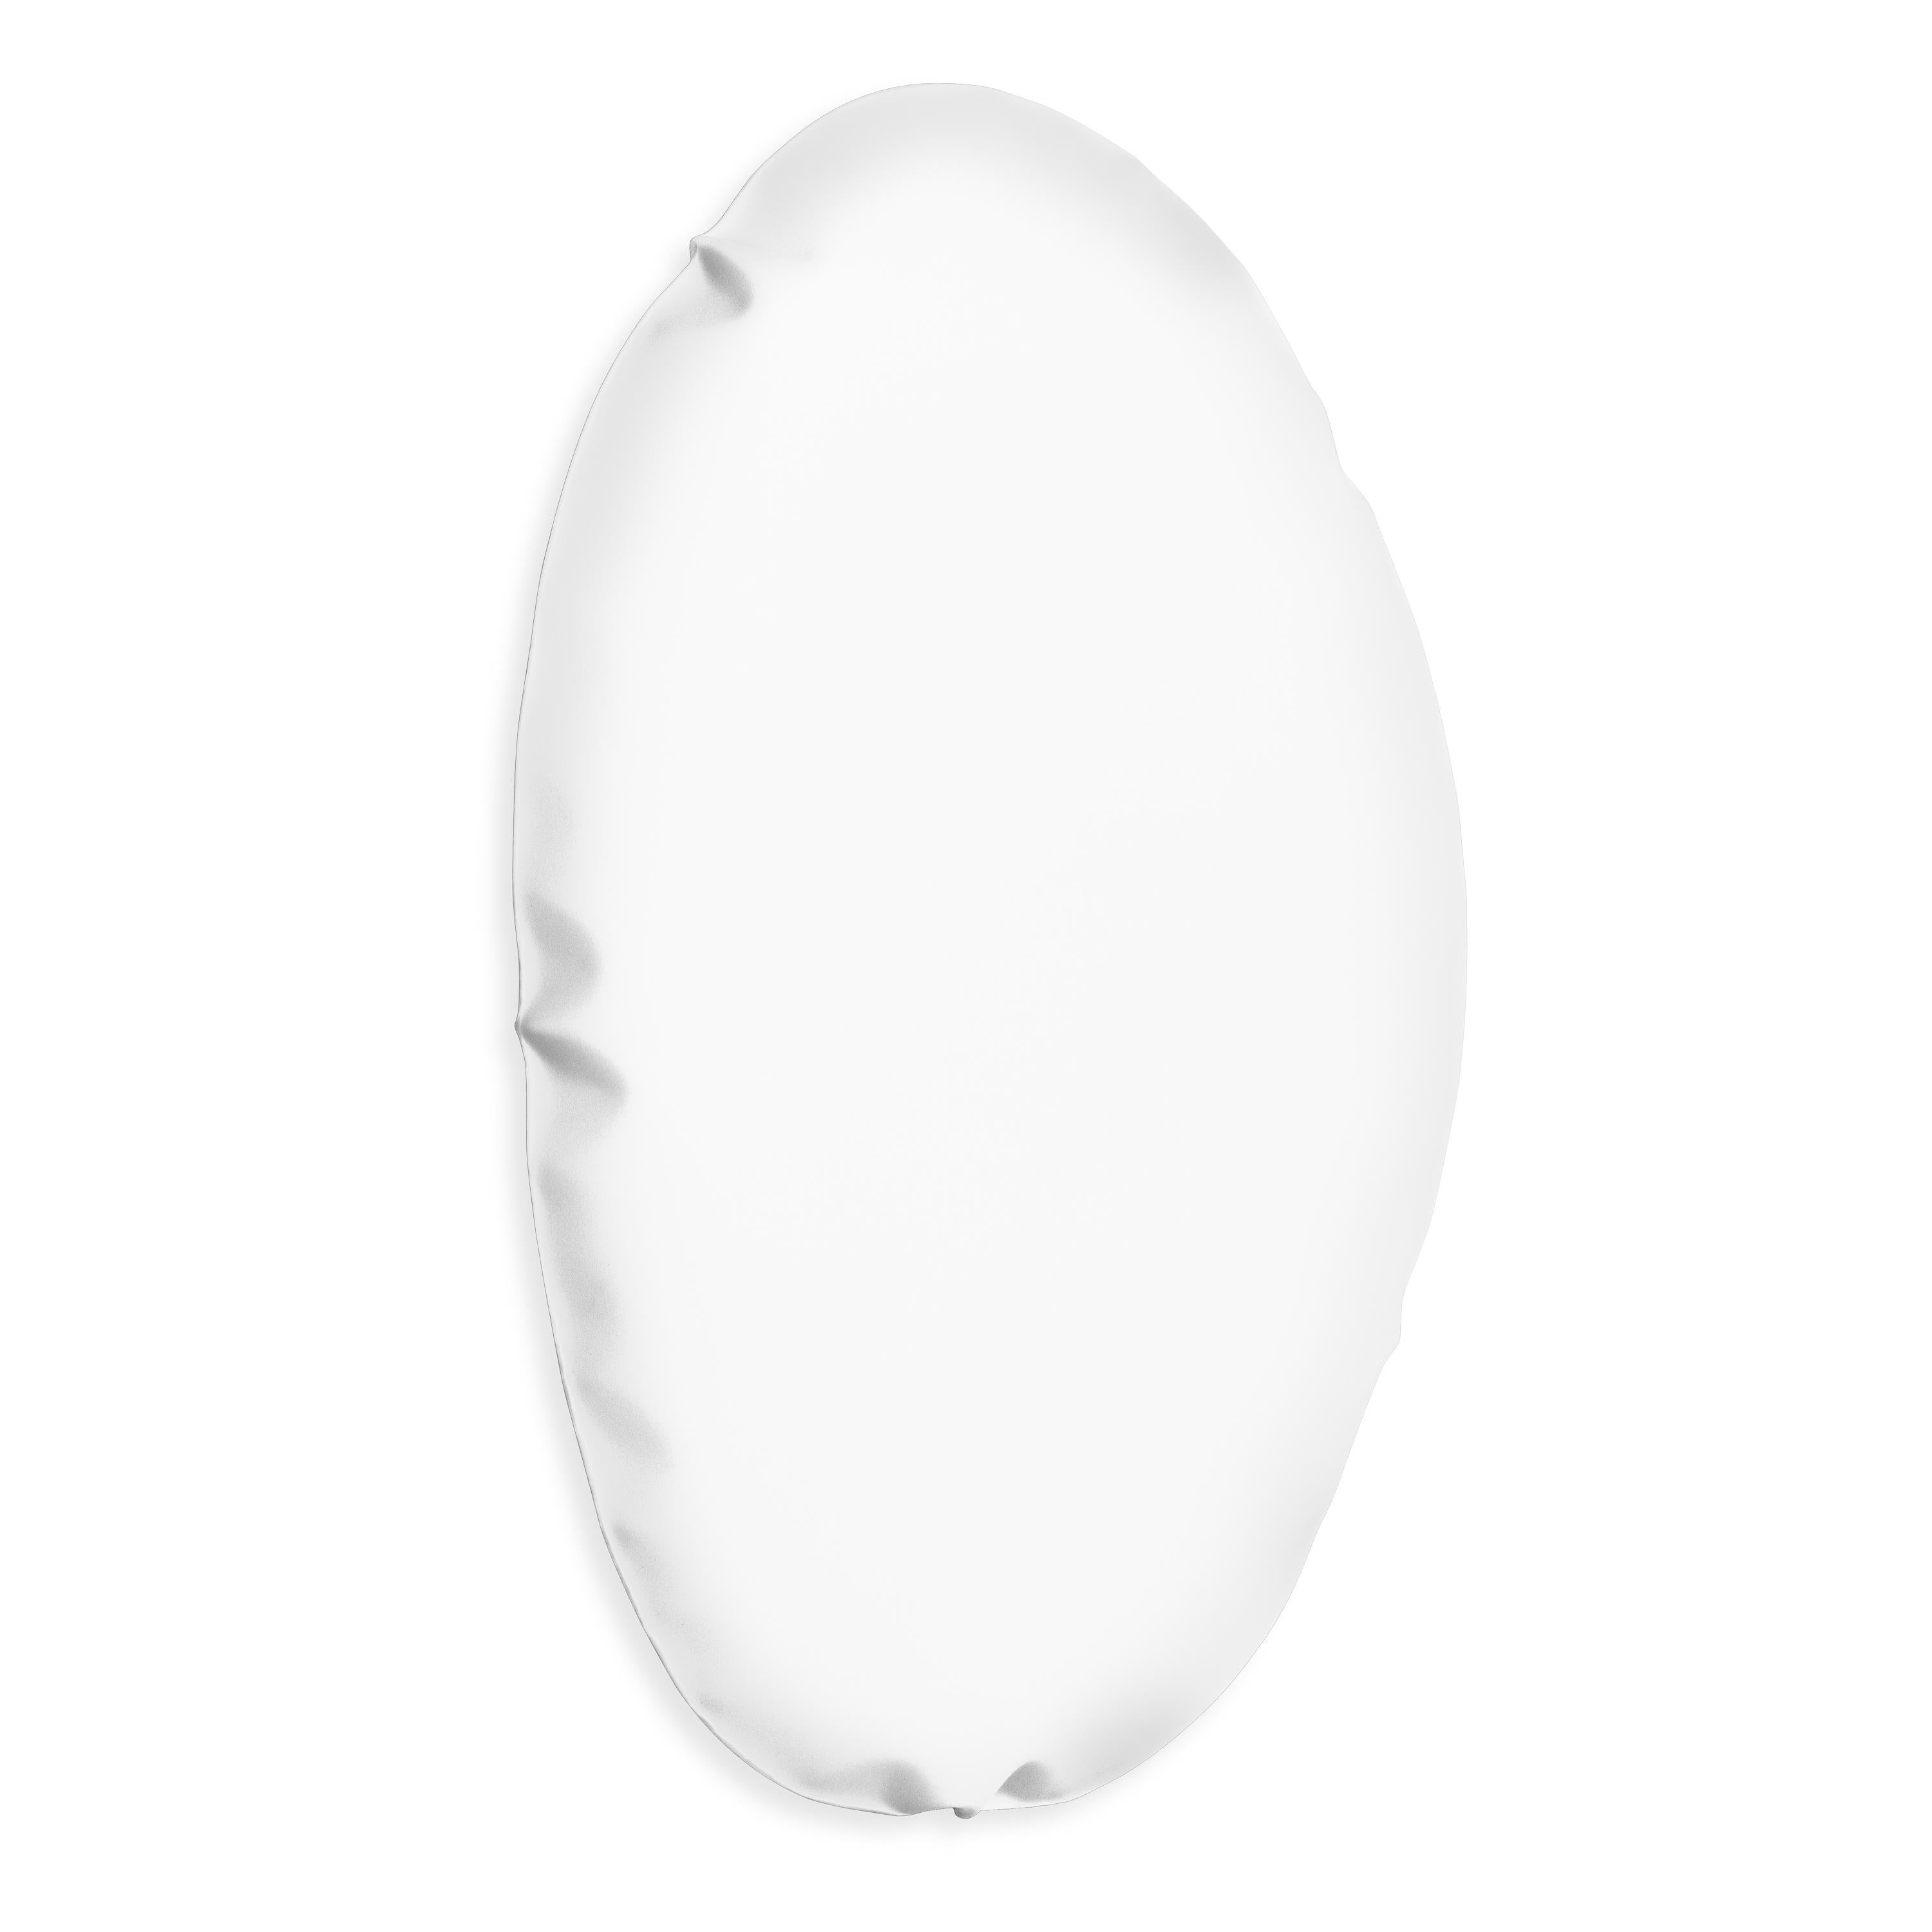 Powder-Coated Contemporary White Wall Sculpture 'Tafla O5', Cotton Candy Collection by Zieta For Sale